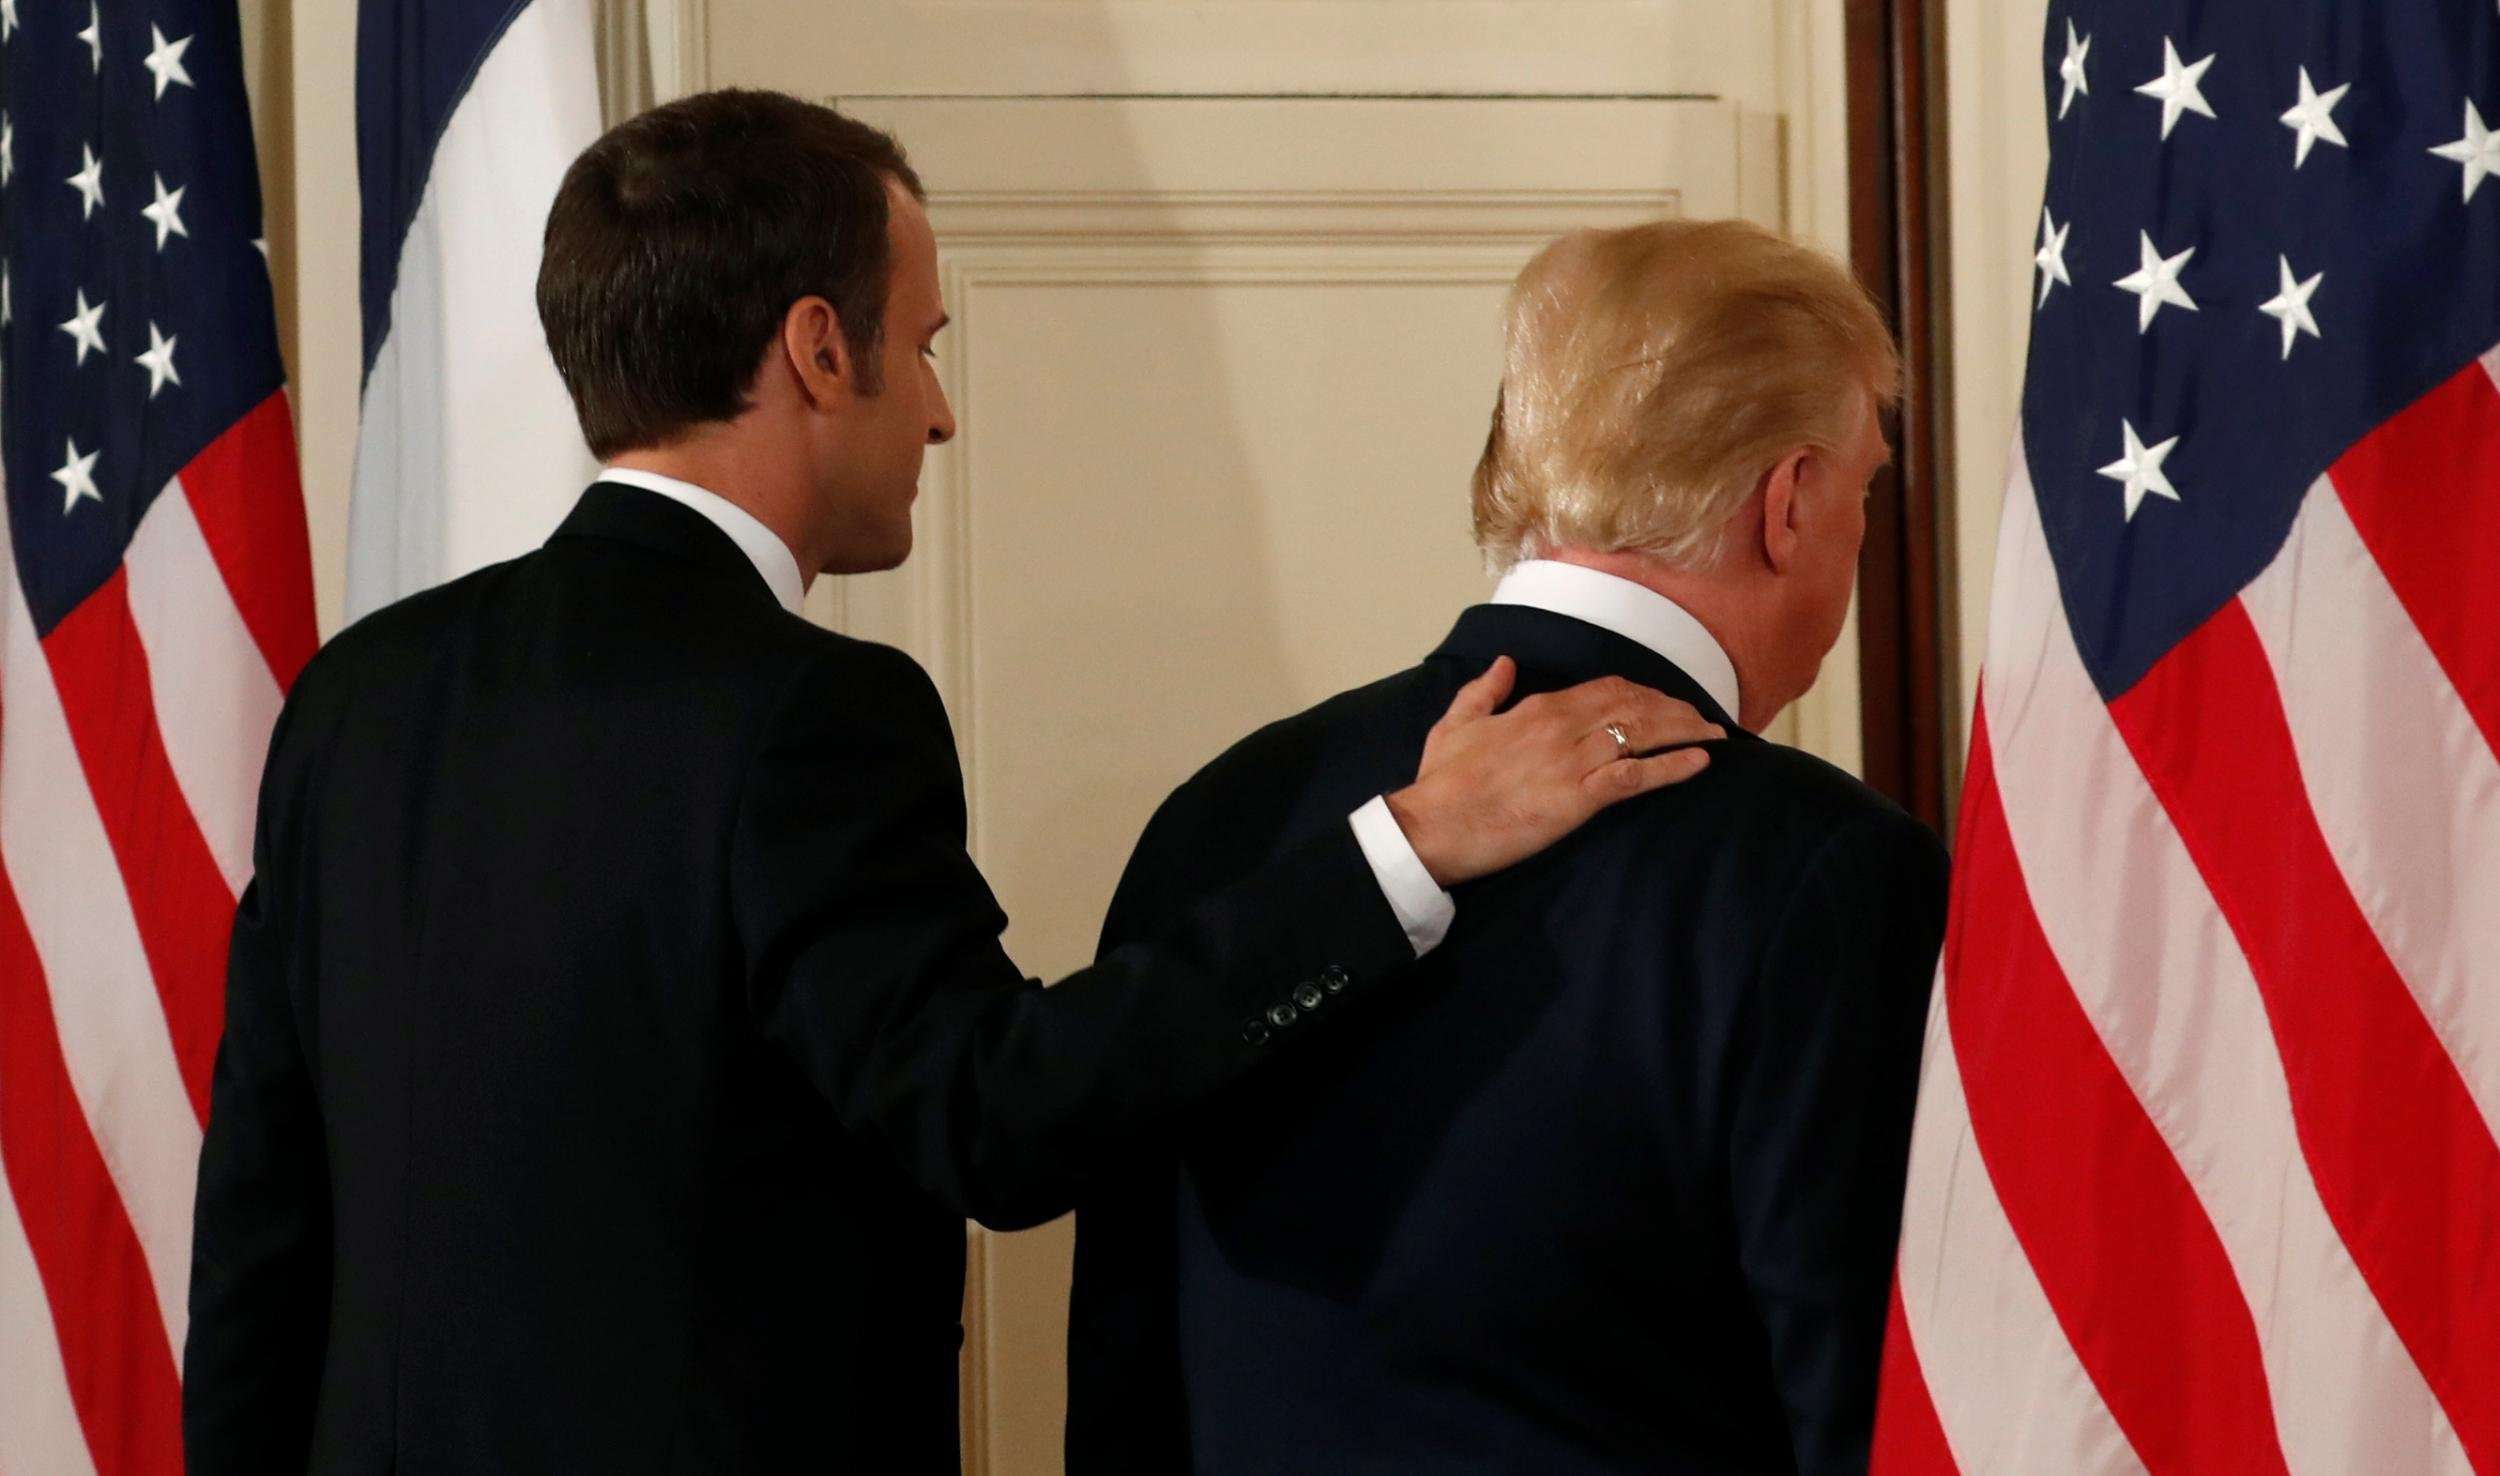 image for Macron turns on Trump after US president attacks EU and Canada: 'We don't mind being G6, if needs be’